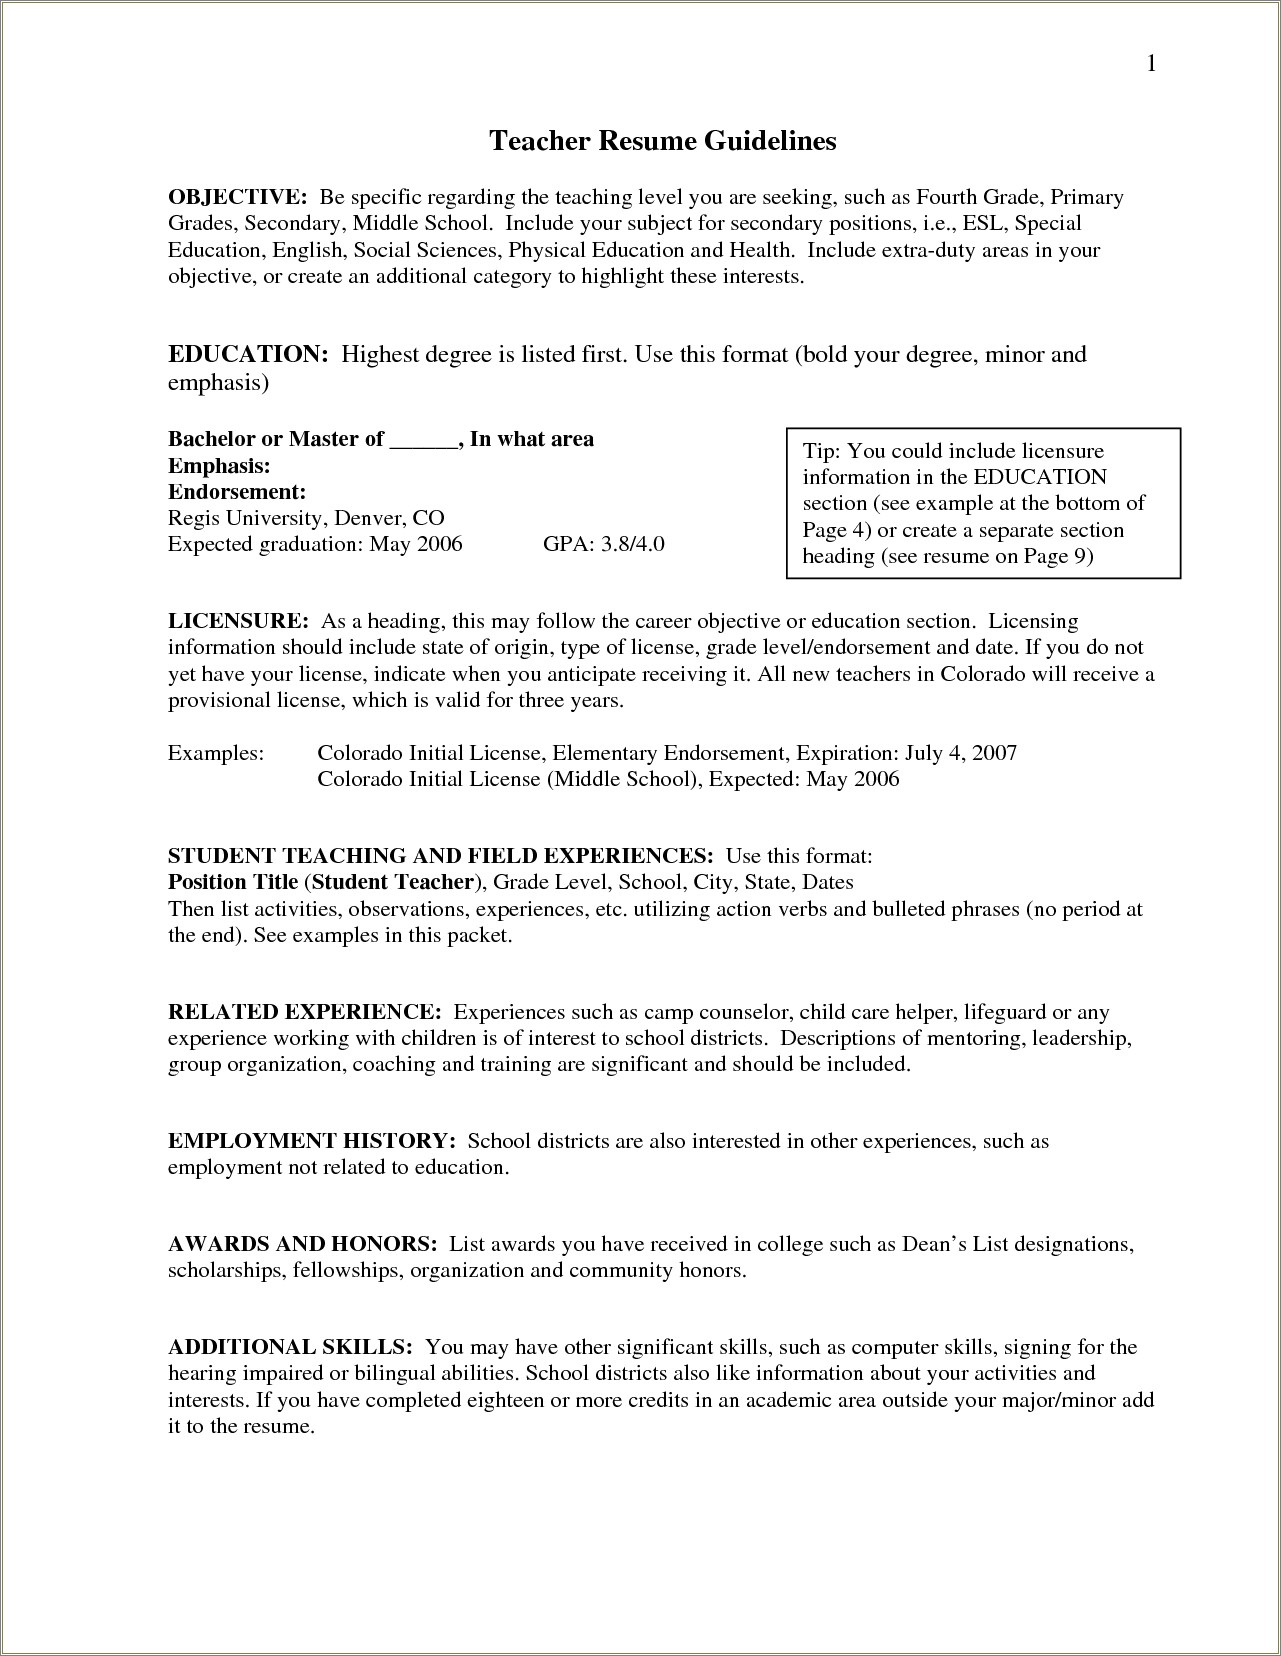 Resume Objective For Counselor Position